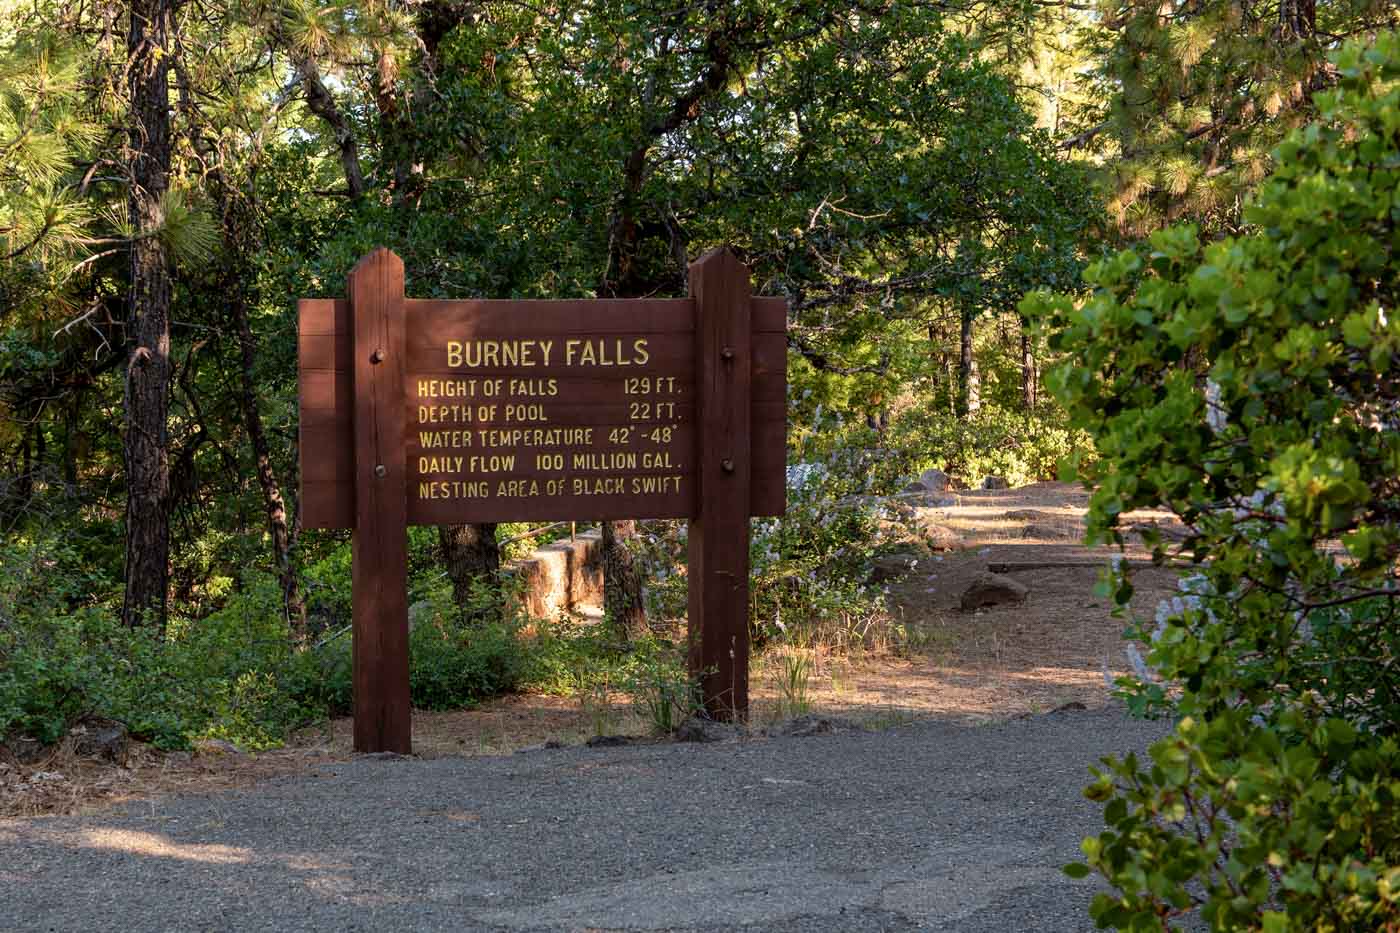 Burney Falls hiking trail and sign. Sign says height of falls at 129ft, Depth of pool at 22ft, and water temperature at 42 to 48 degrees Fahrenheit. 